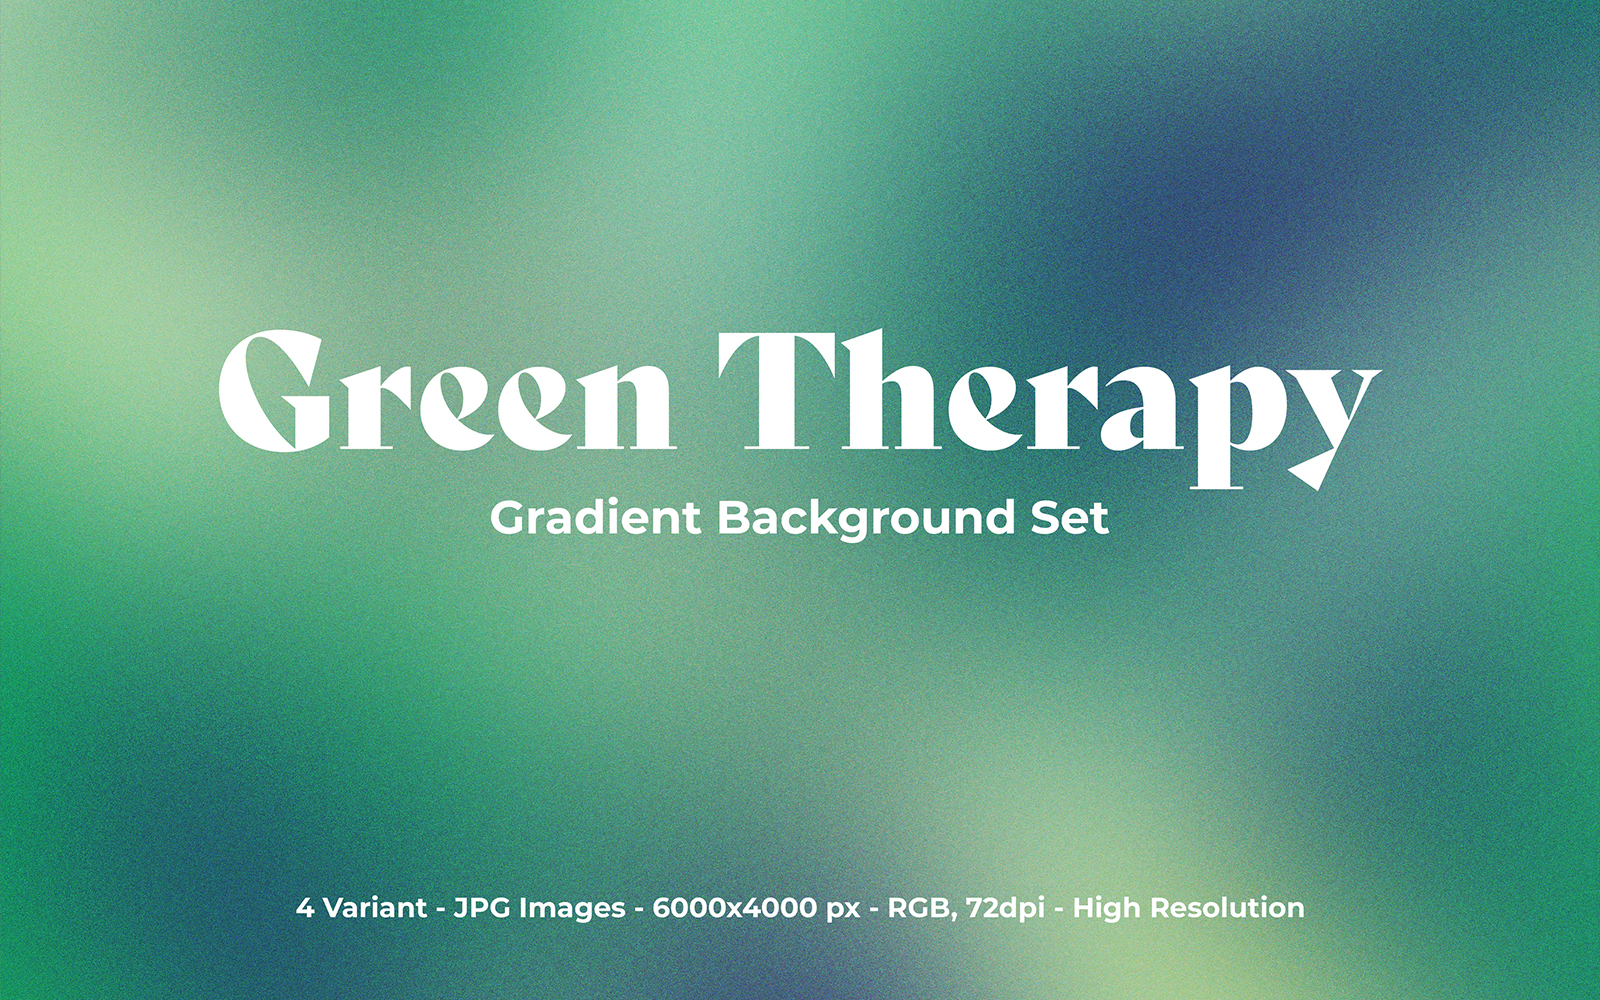 Green Therapy Gradient Background